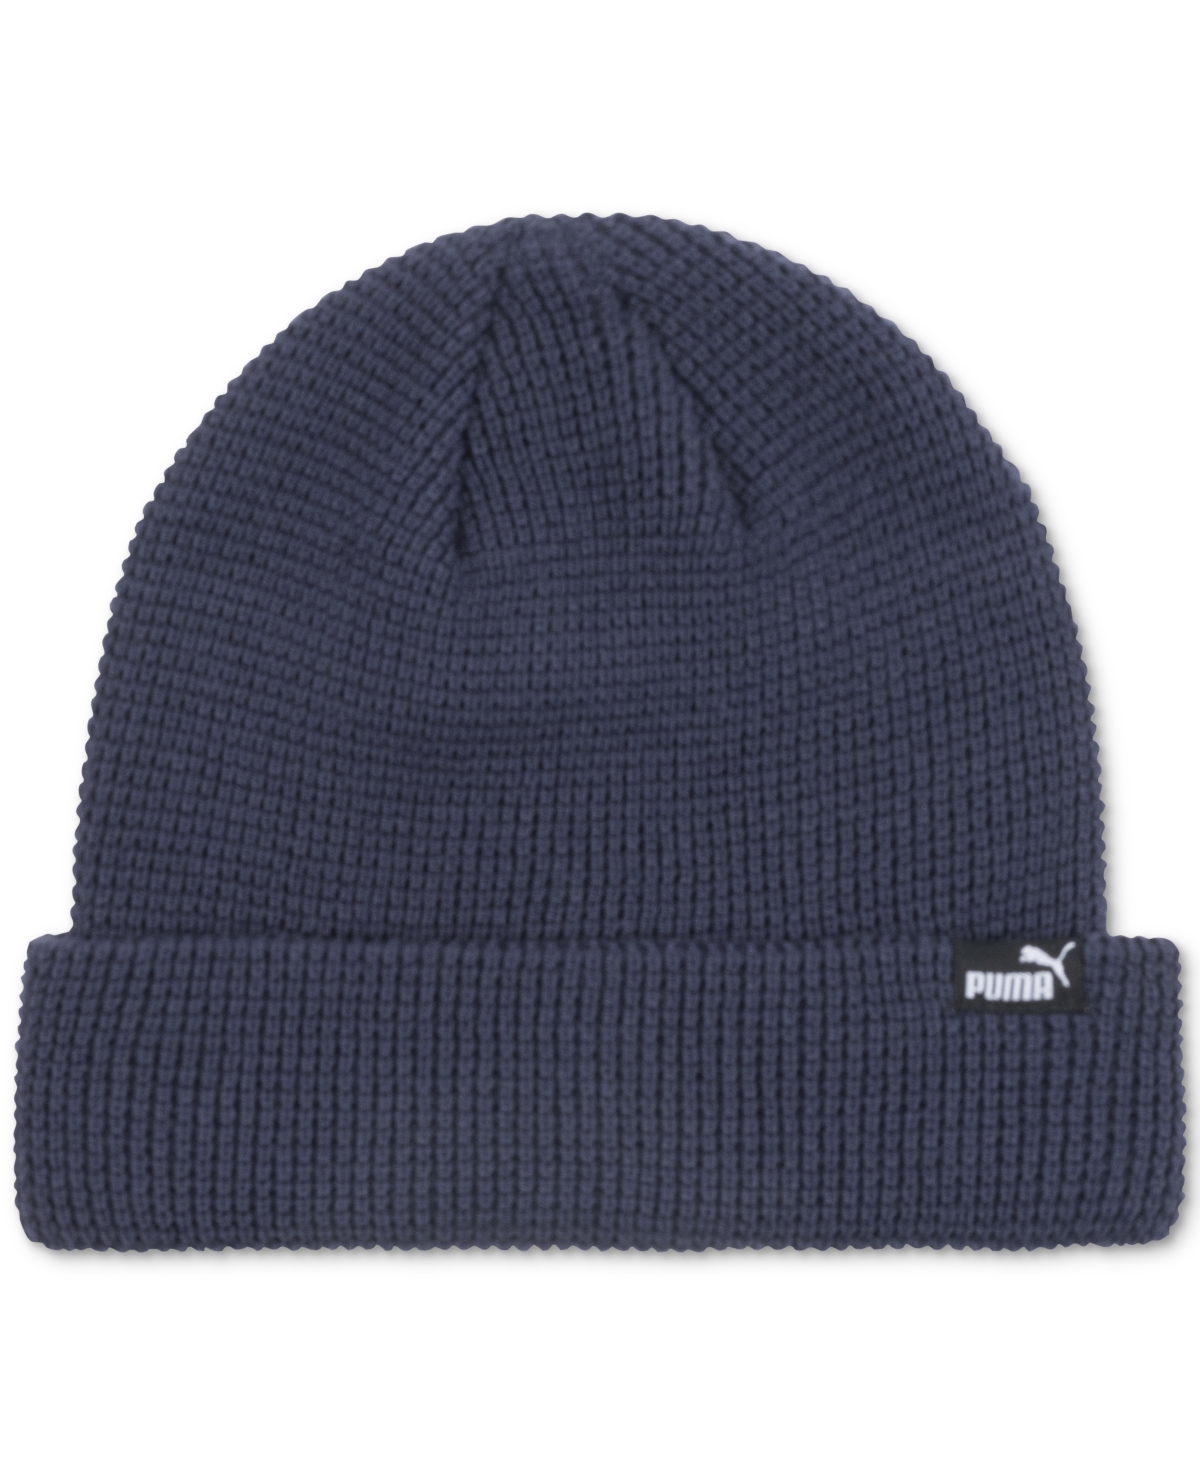 Men's Prospect Watchman Space Dyed Knit Beanie - Navy